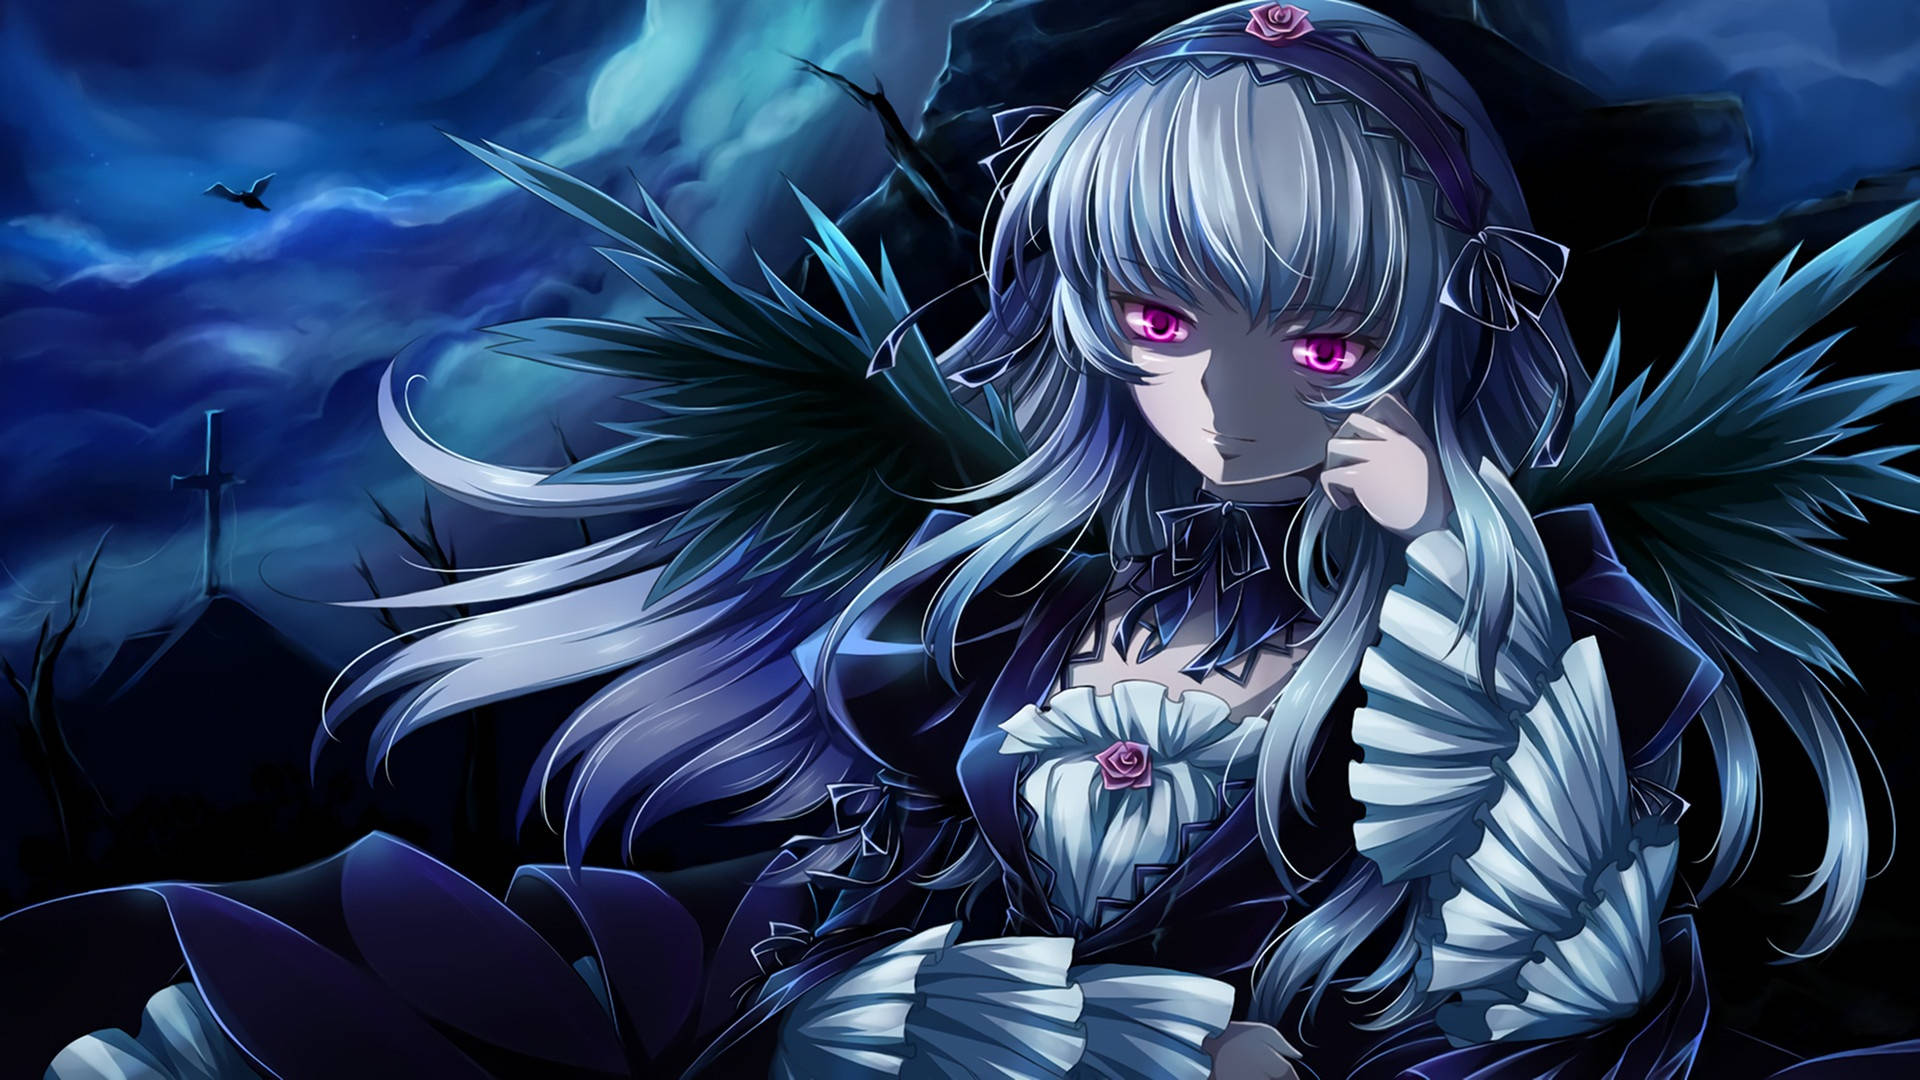 anime girl with purple eyes and wings Wallpaper